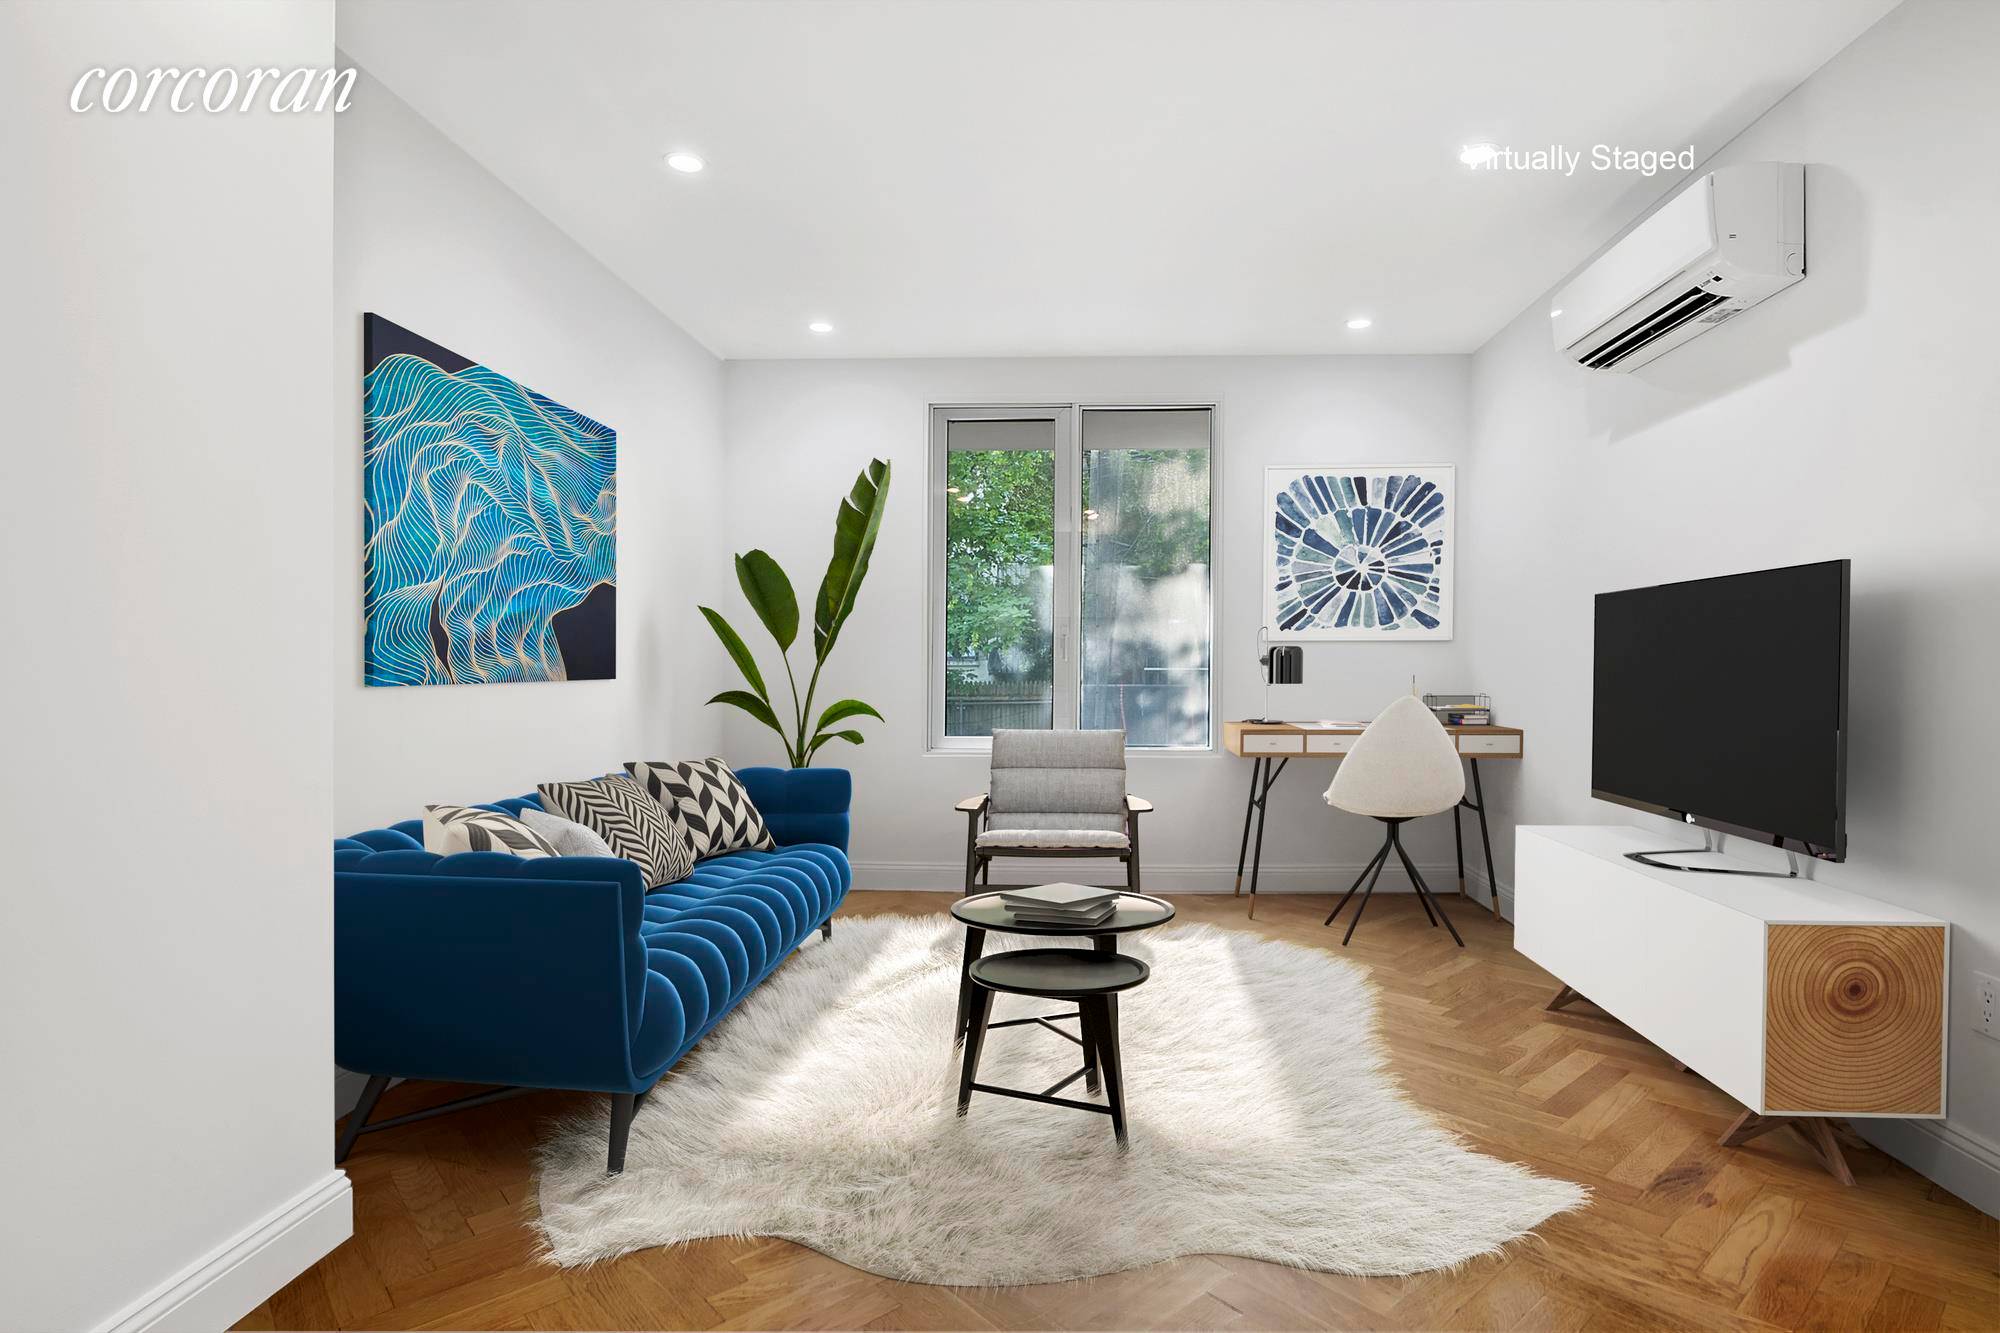 At the nexus of Clinton Hill, Fort Greene, and Prospect Heights stands 531 Vanderbilt Avenue, a recently developed boutique condominium building at the center of it all.